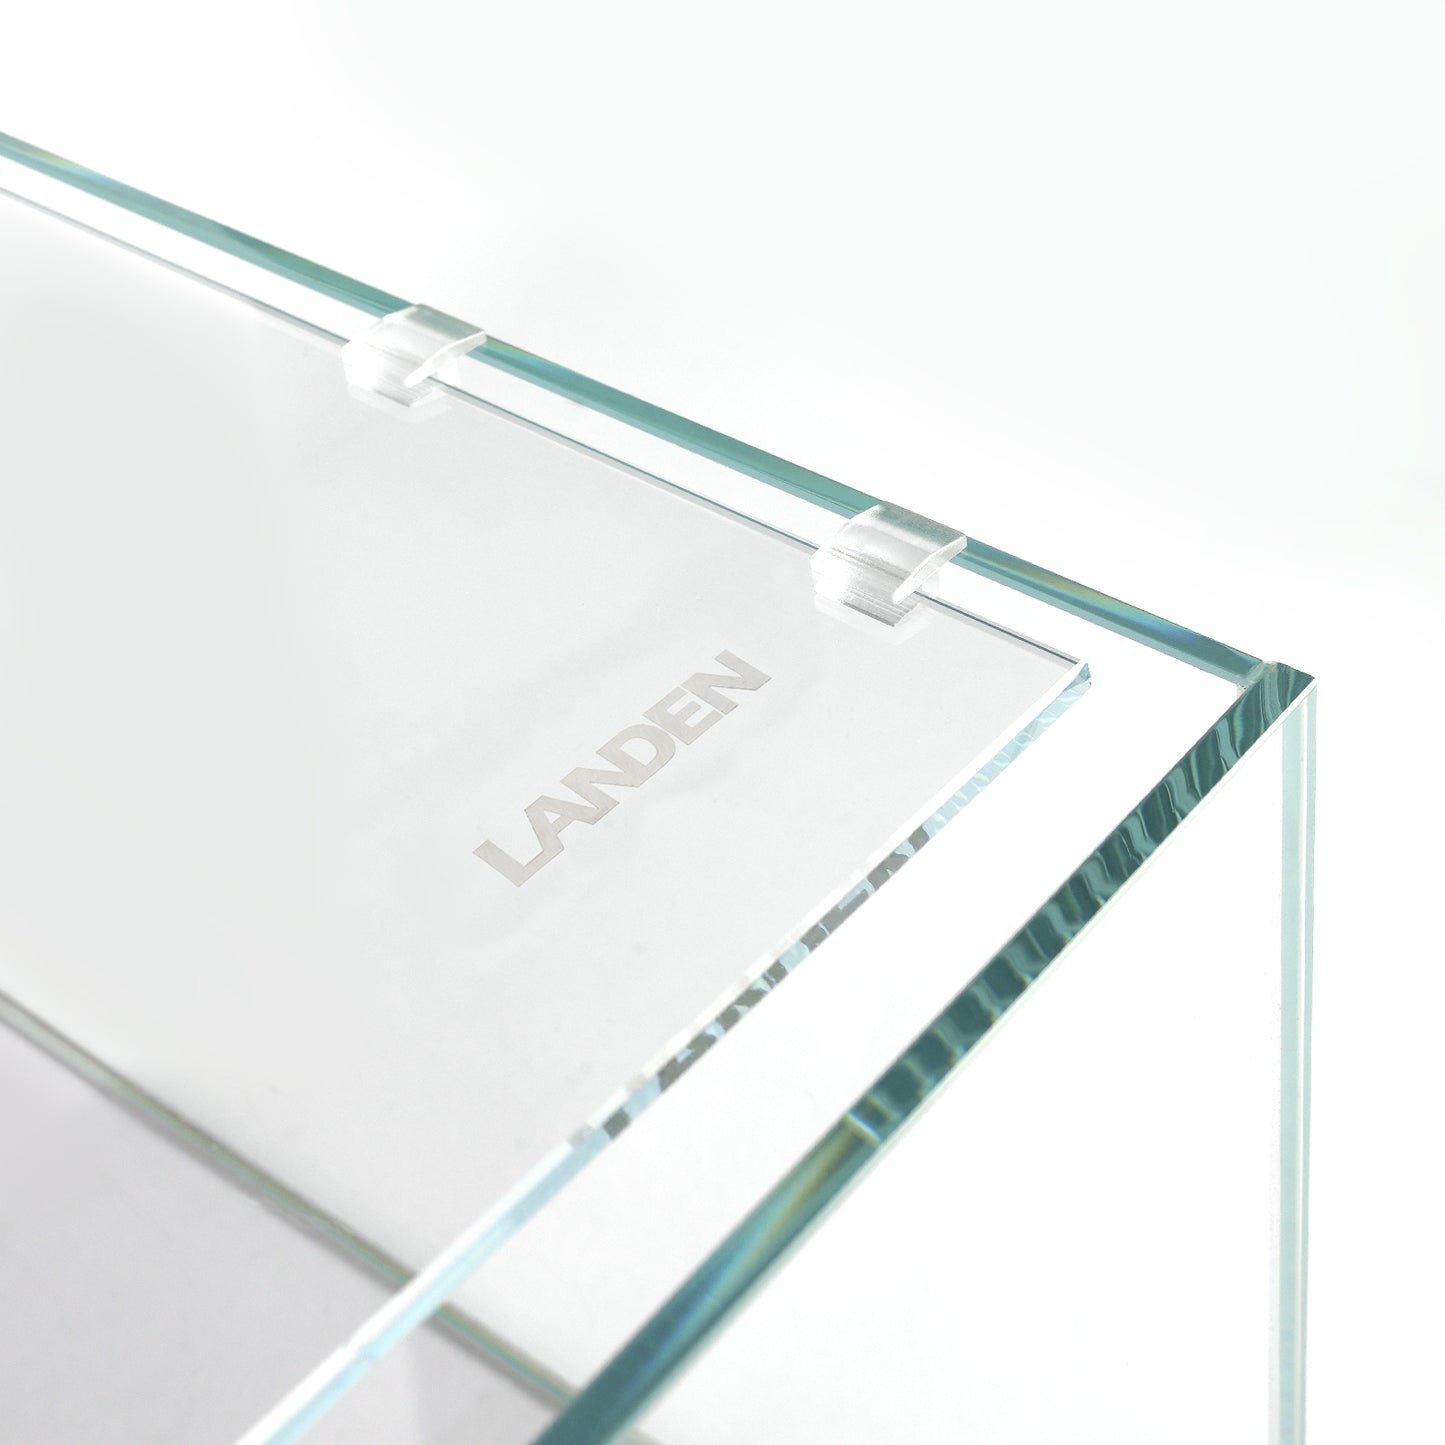 LANDEN 4mm Thick Clear Glass Aquarium Lid, Includes 4 Clips for Secure Placement, 282 x 225mm(11.1x8.86 inches) Adapted to CB303030, ARF30